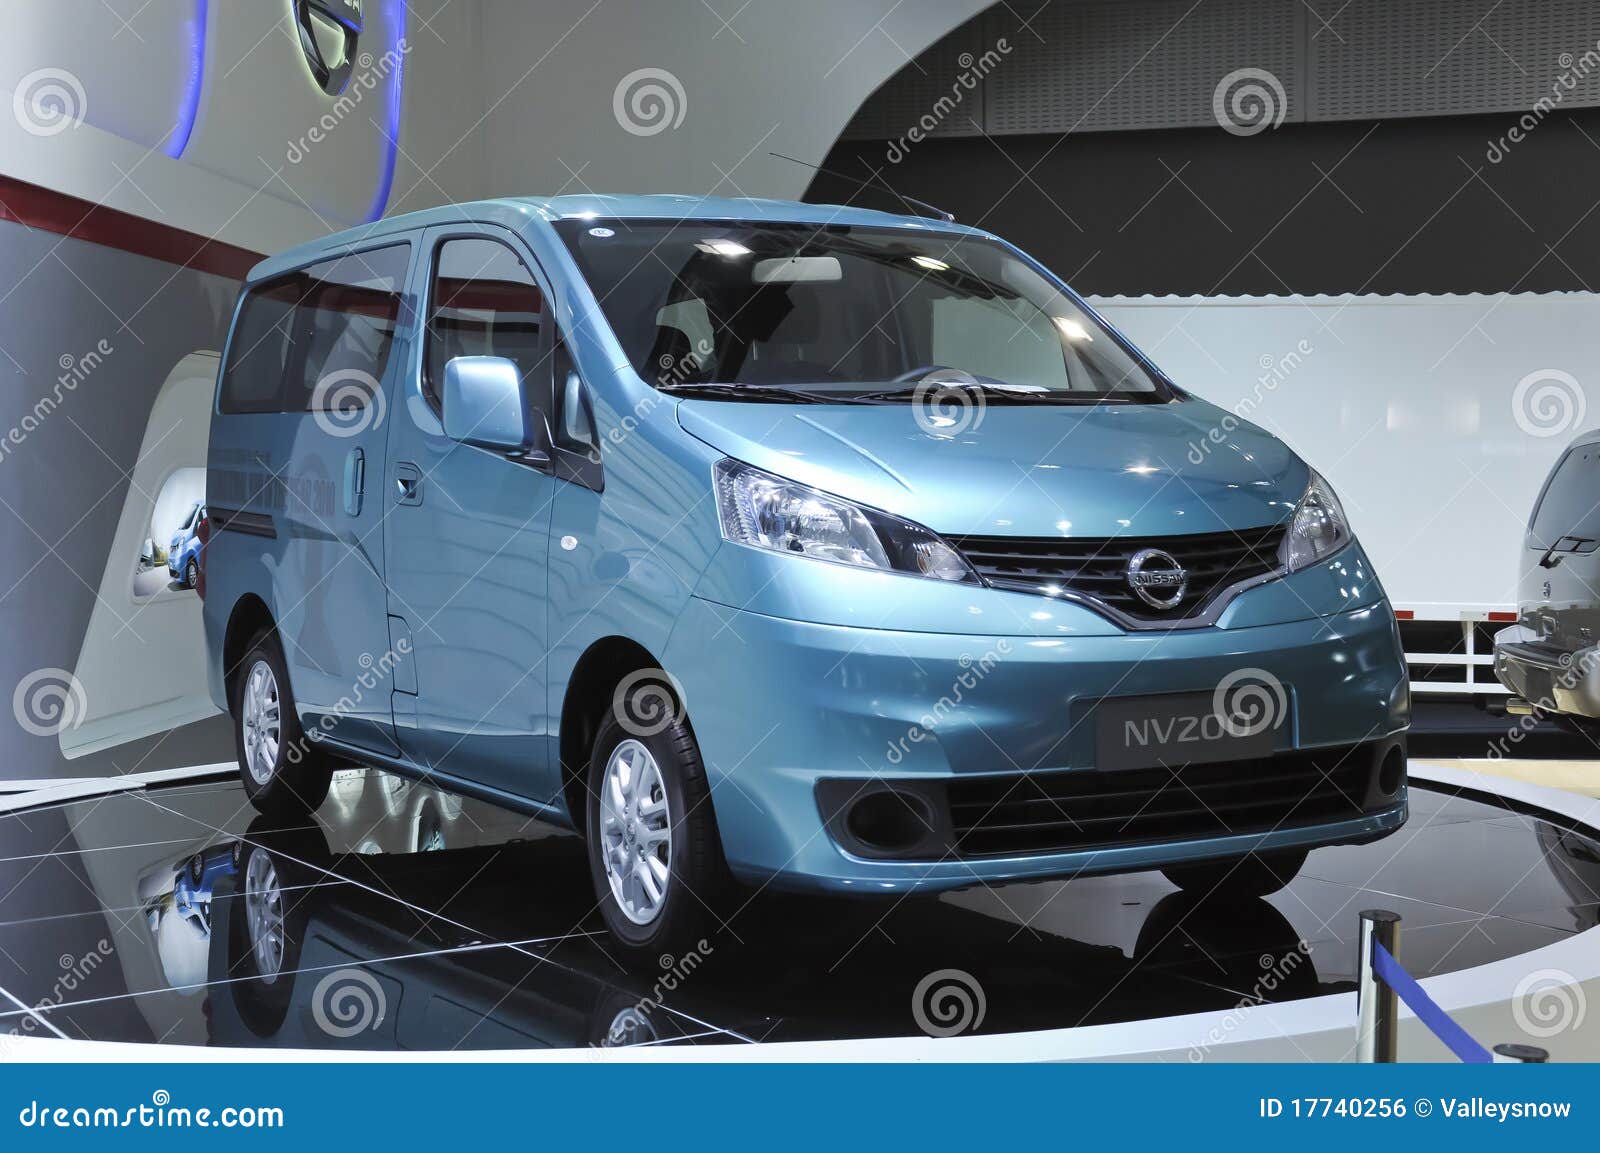 Where is the nissan nv200 built